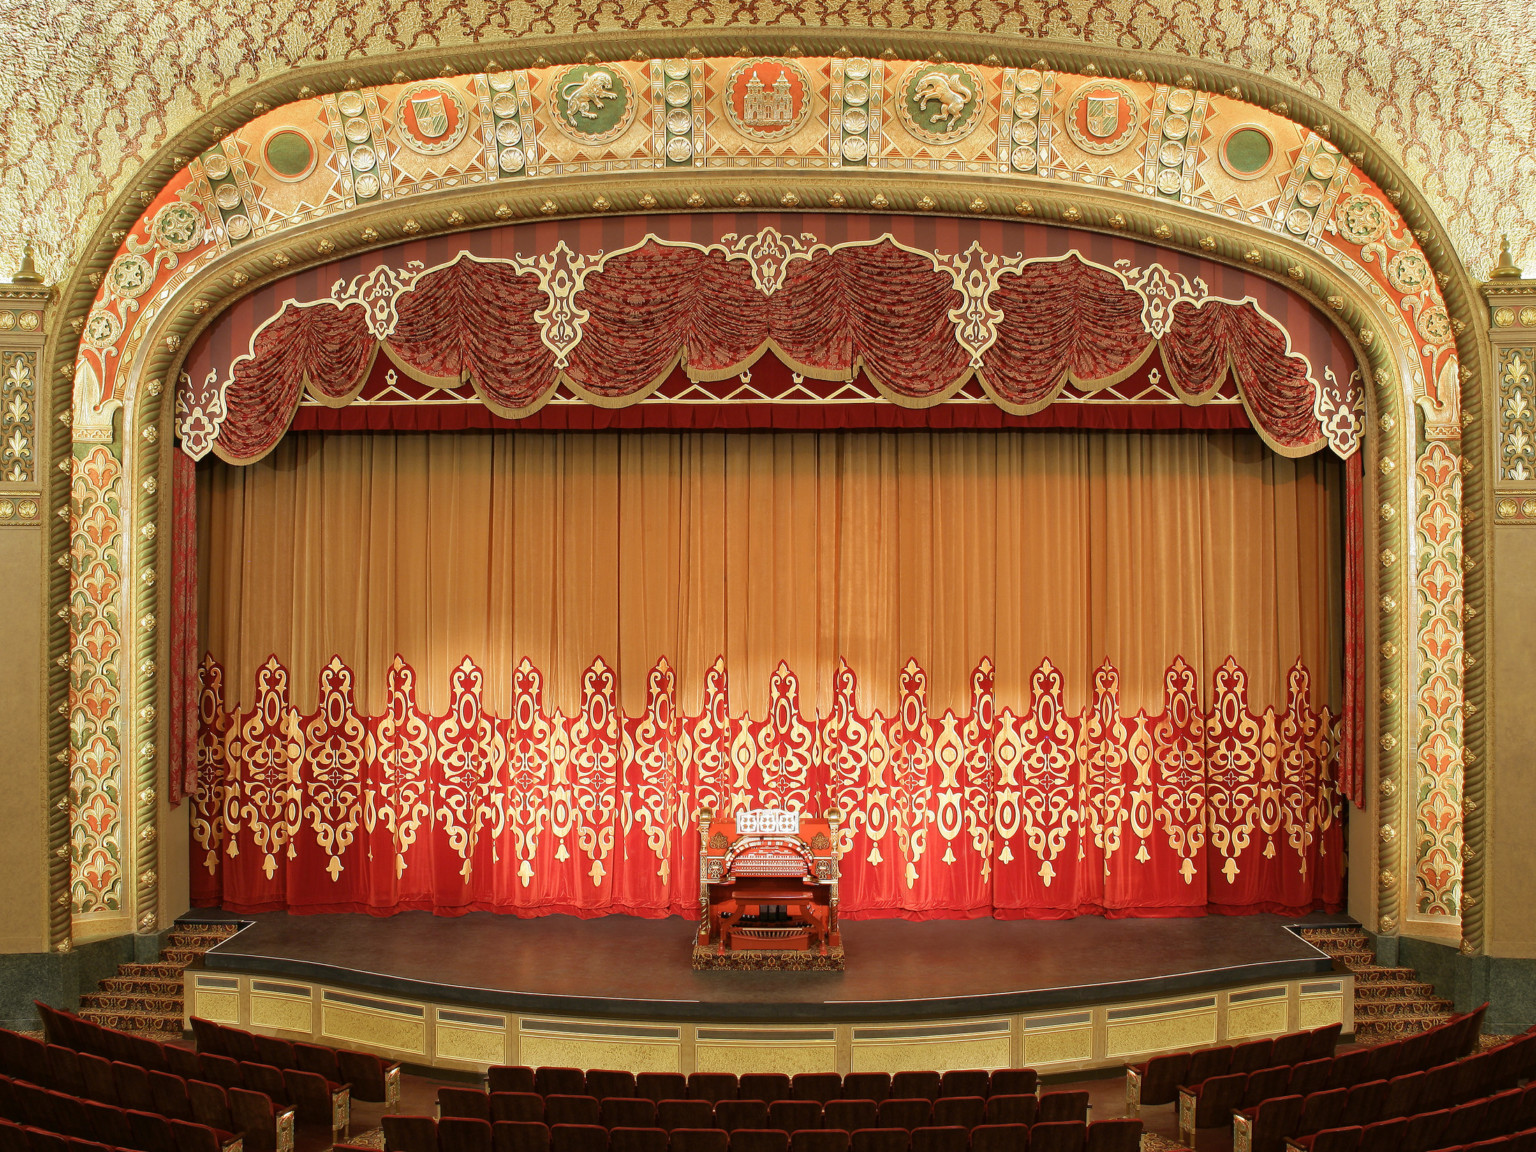 Stage with gold and red curtain and gold carved proscenium with green and orange accents a red and gold instrument at center